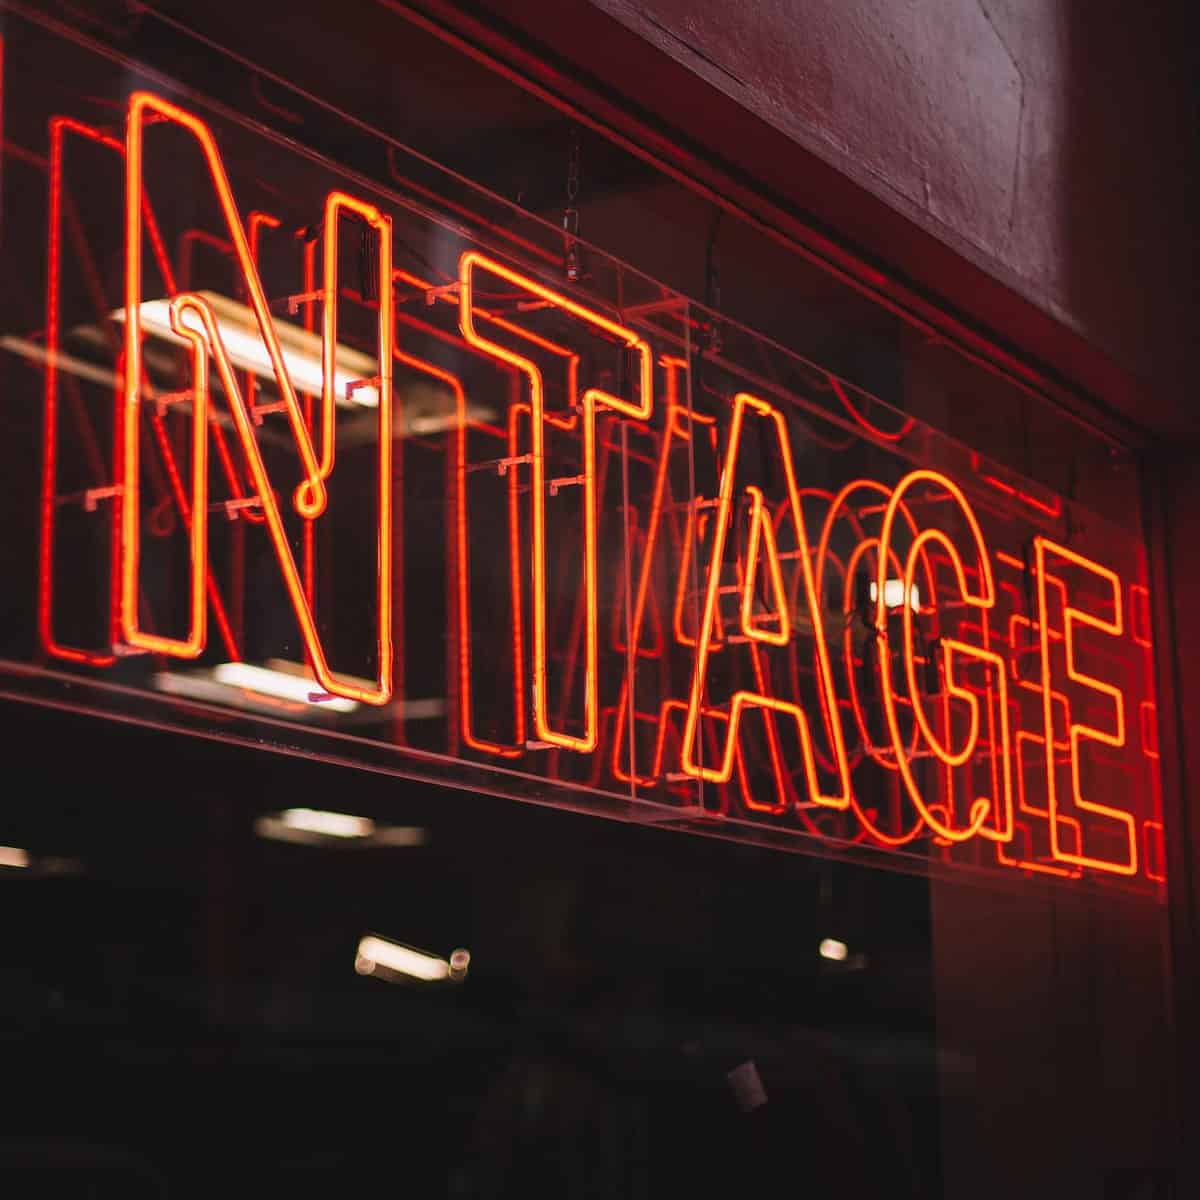 Is Vintage Clothing Ethical? 10 Things to Consider When Buying Vintage